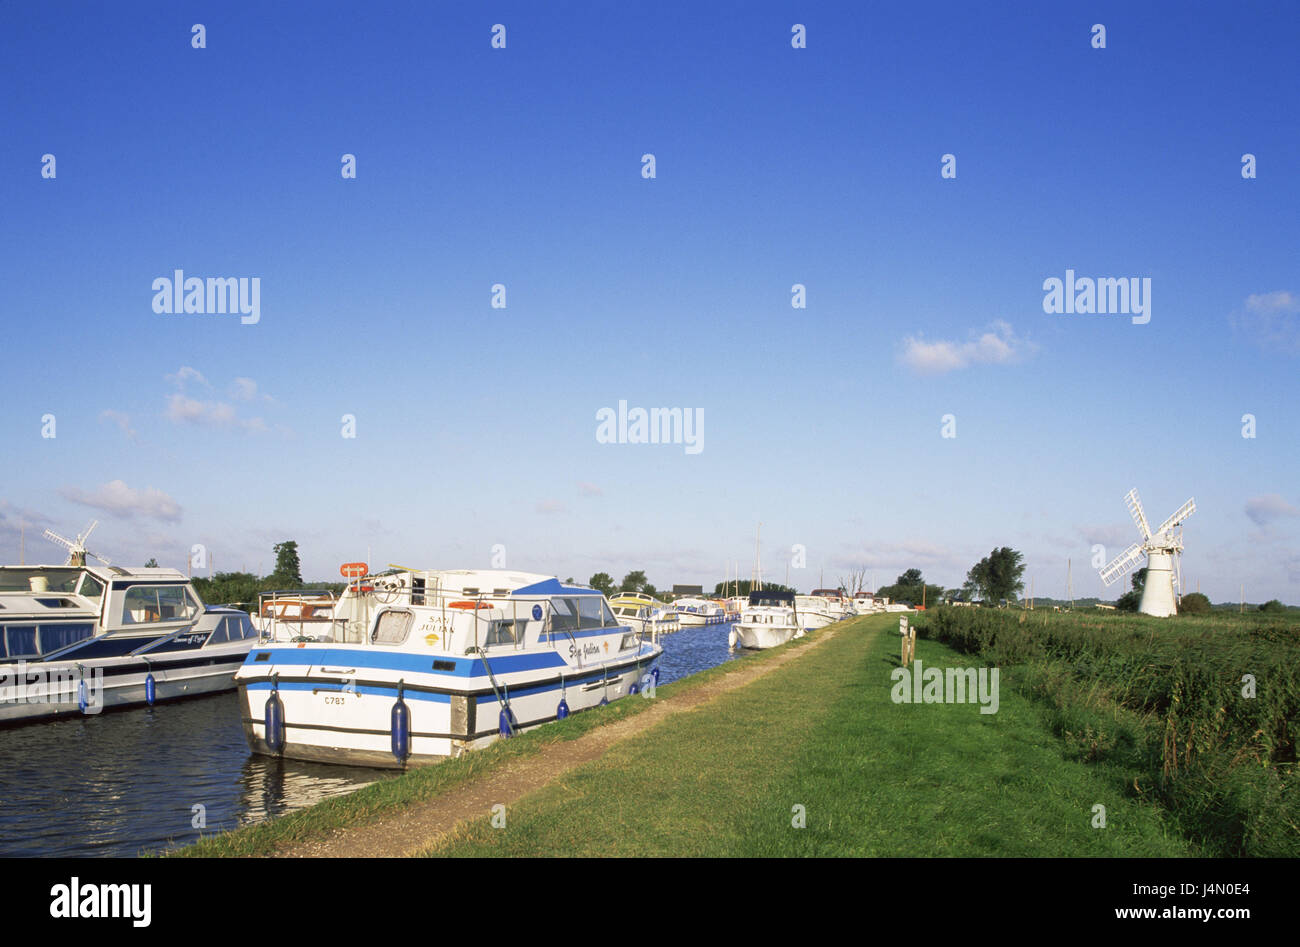 Great Britain, Norfolk, River Thurne, boats, riversides, windmill, England, river scenery, scenery, mill, structure, place of interest, river, waters, boats, anchor, invest, destination, tourism, Stock Photo